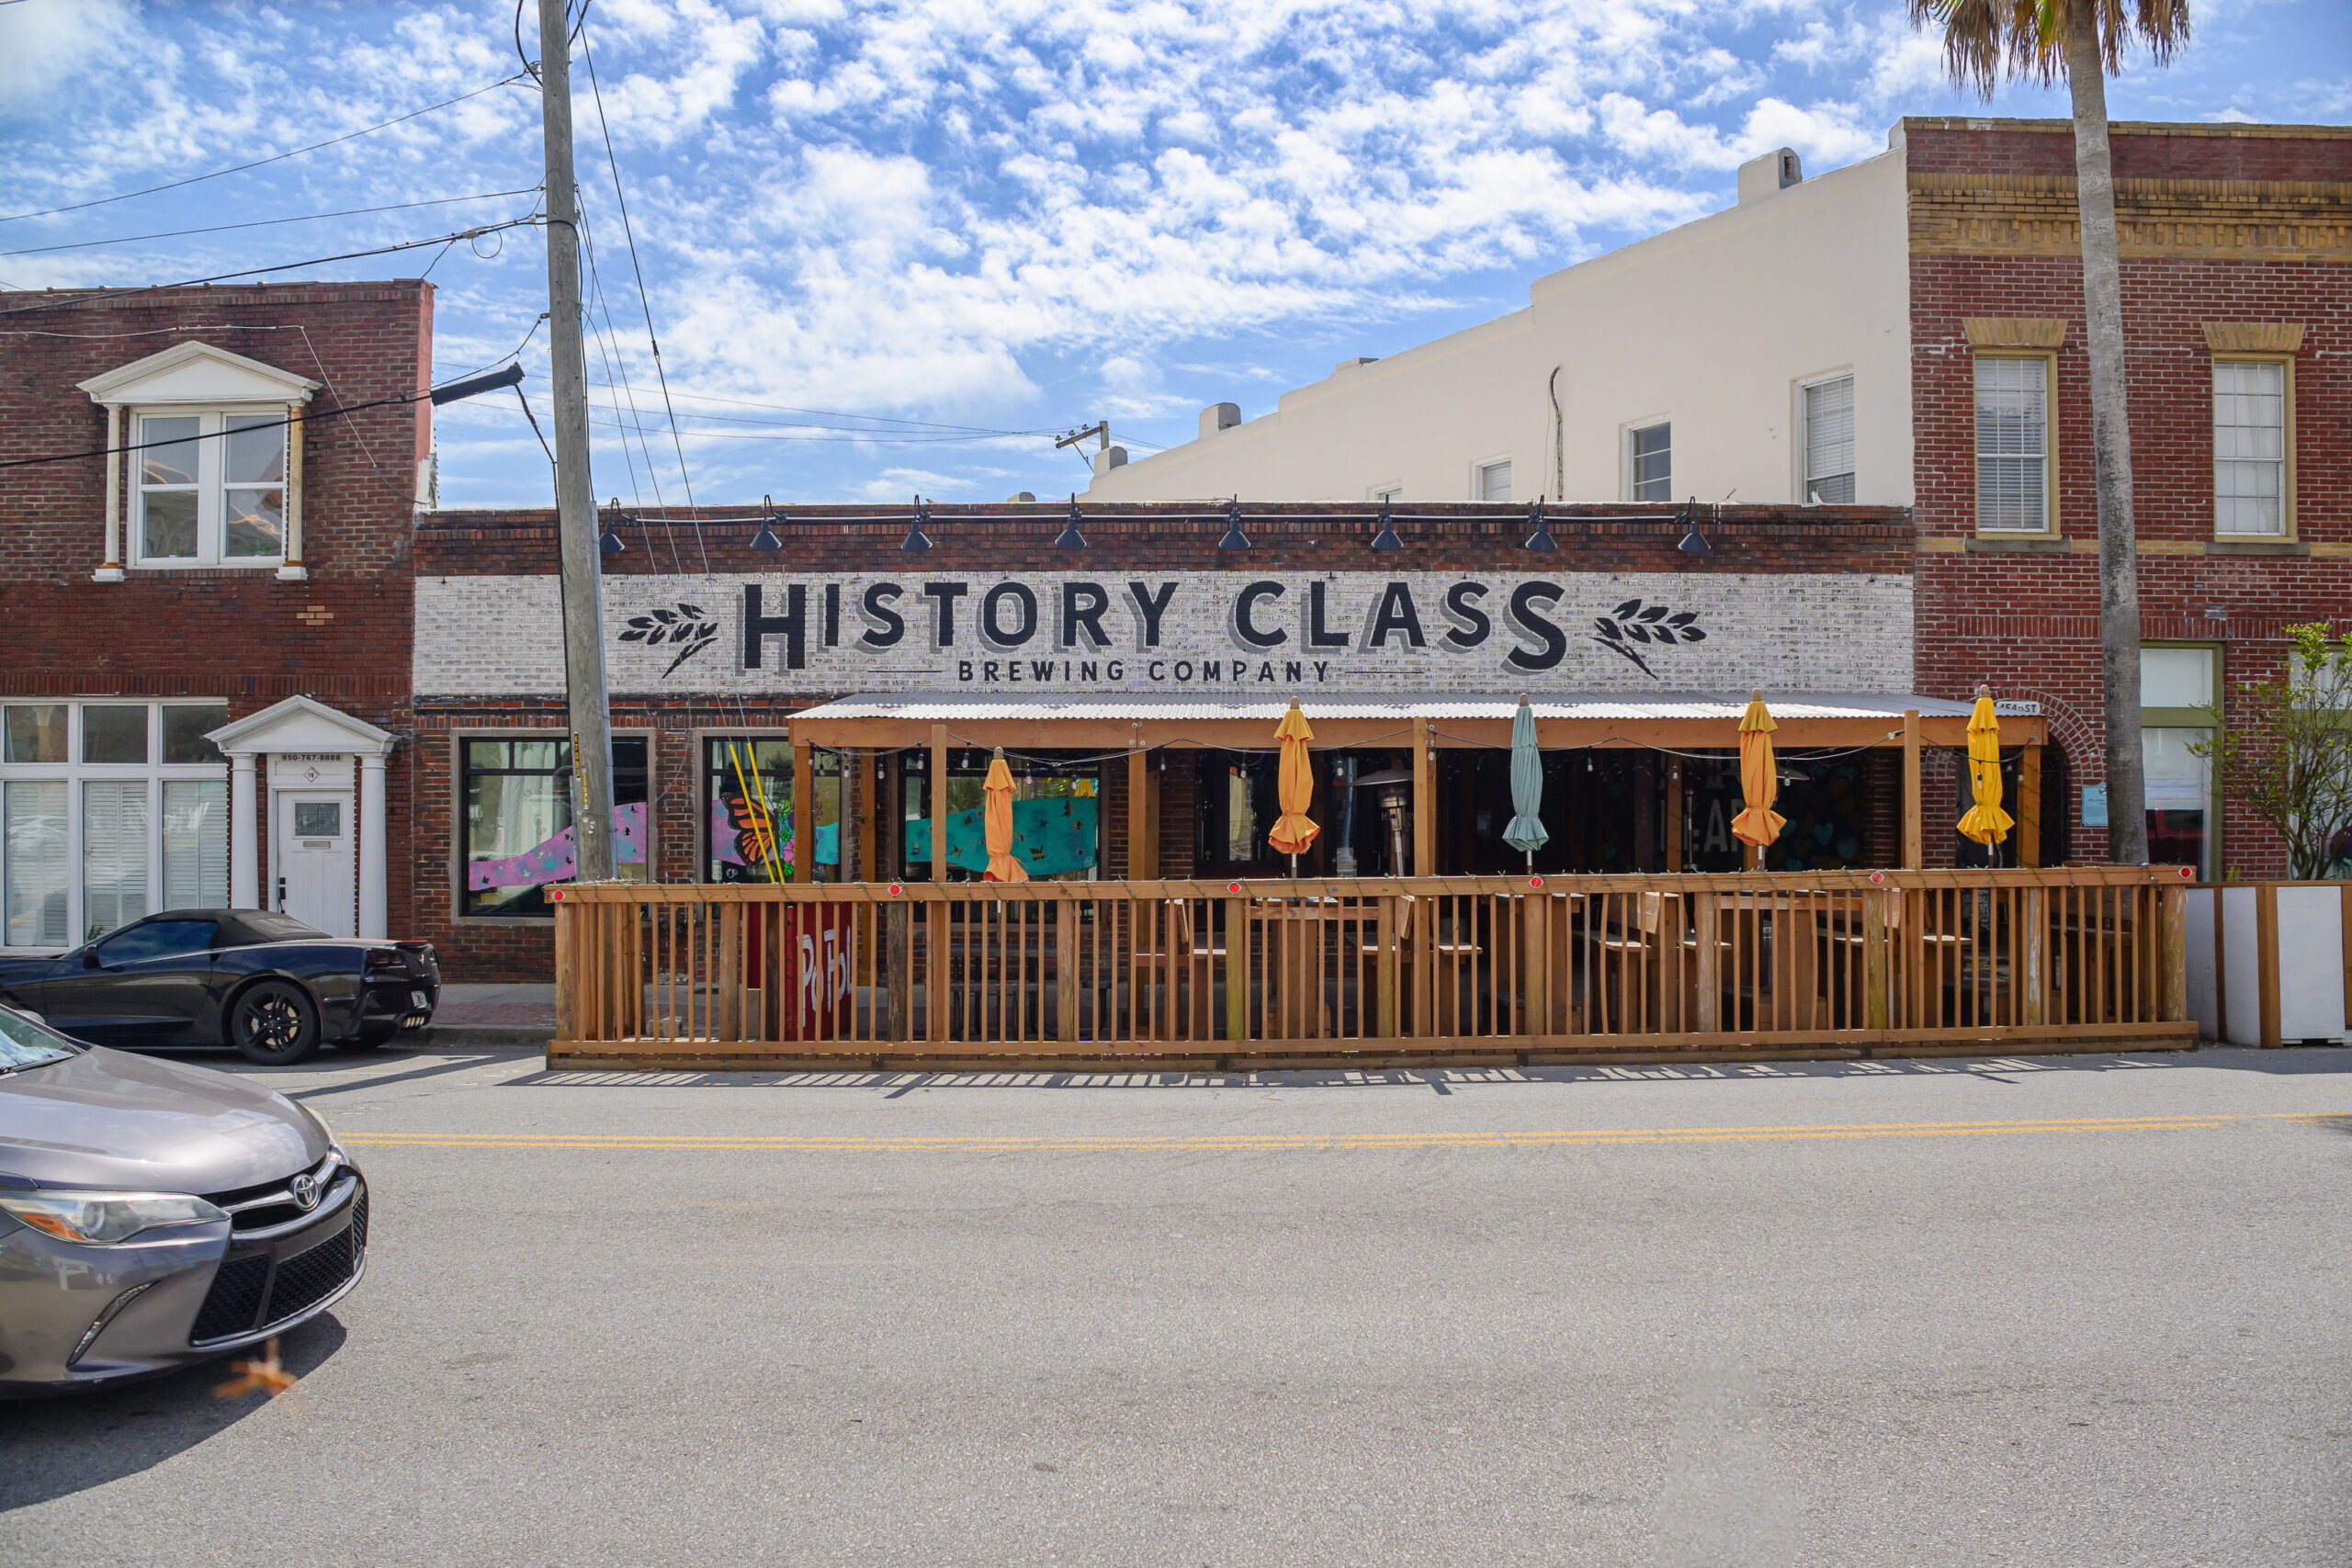 history class brewery near me in downtown panama city florida counts real estate florida